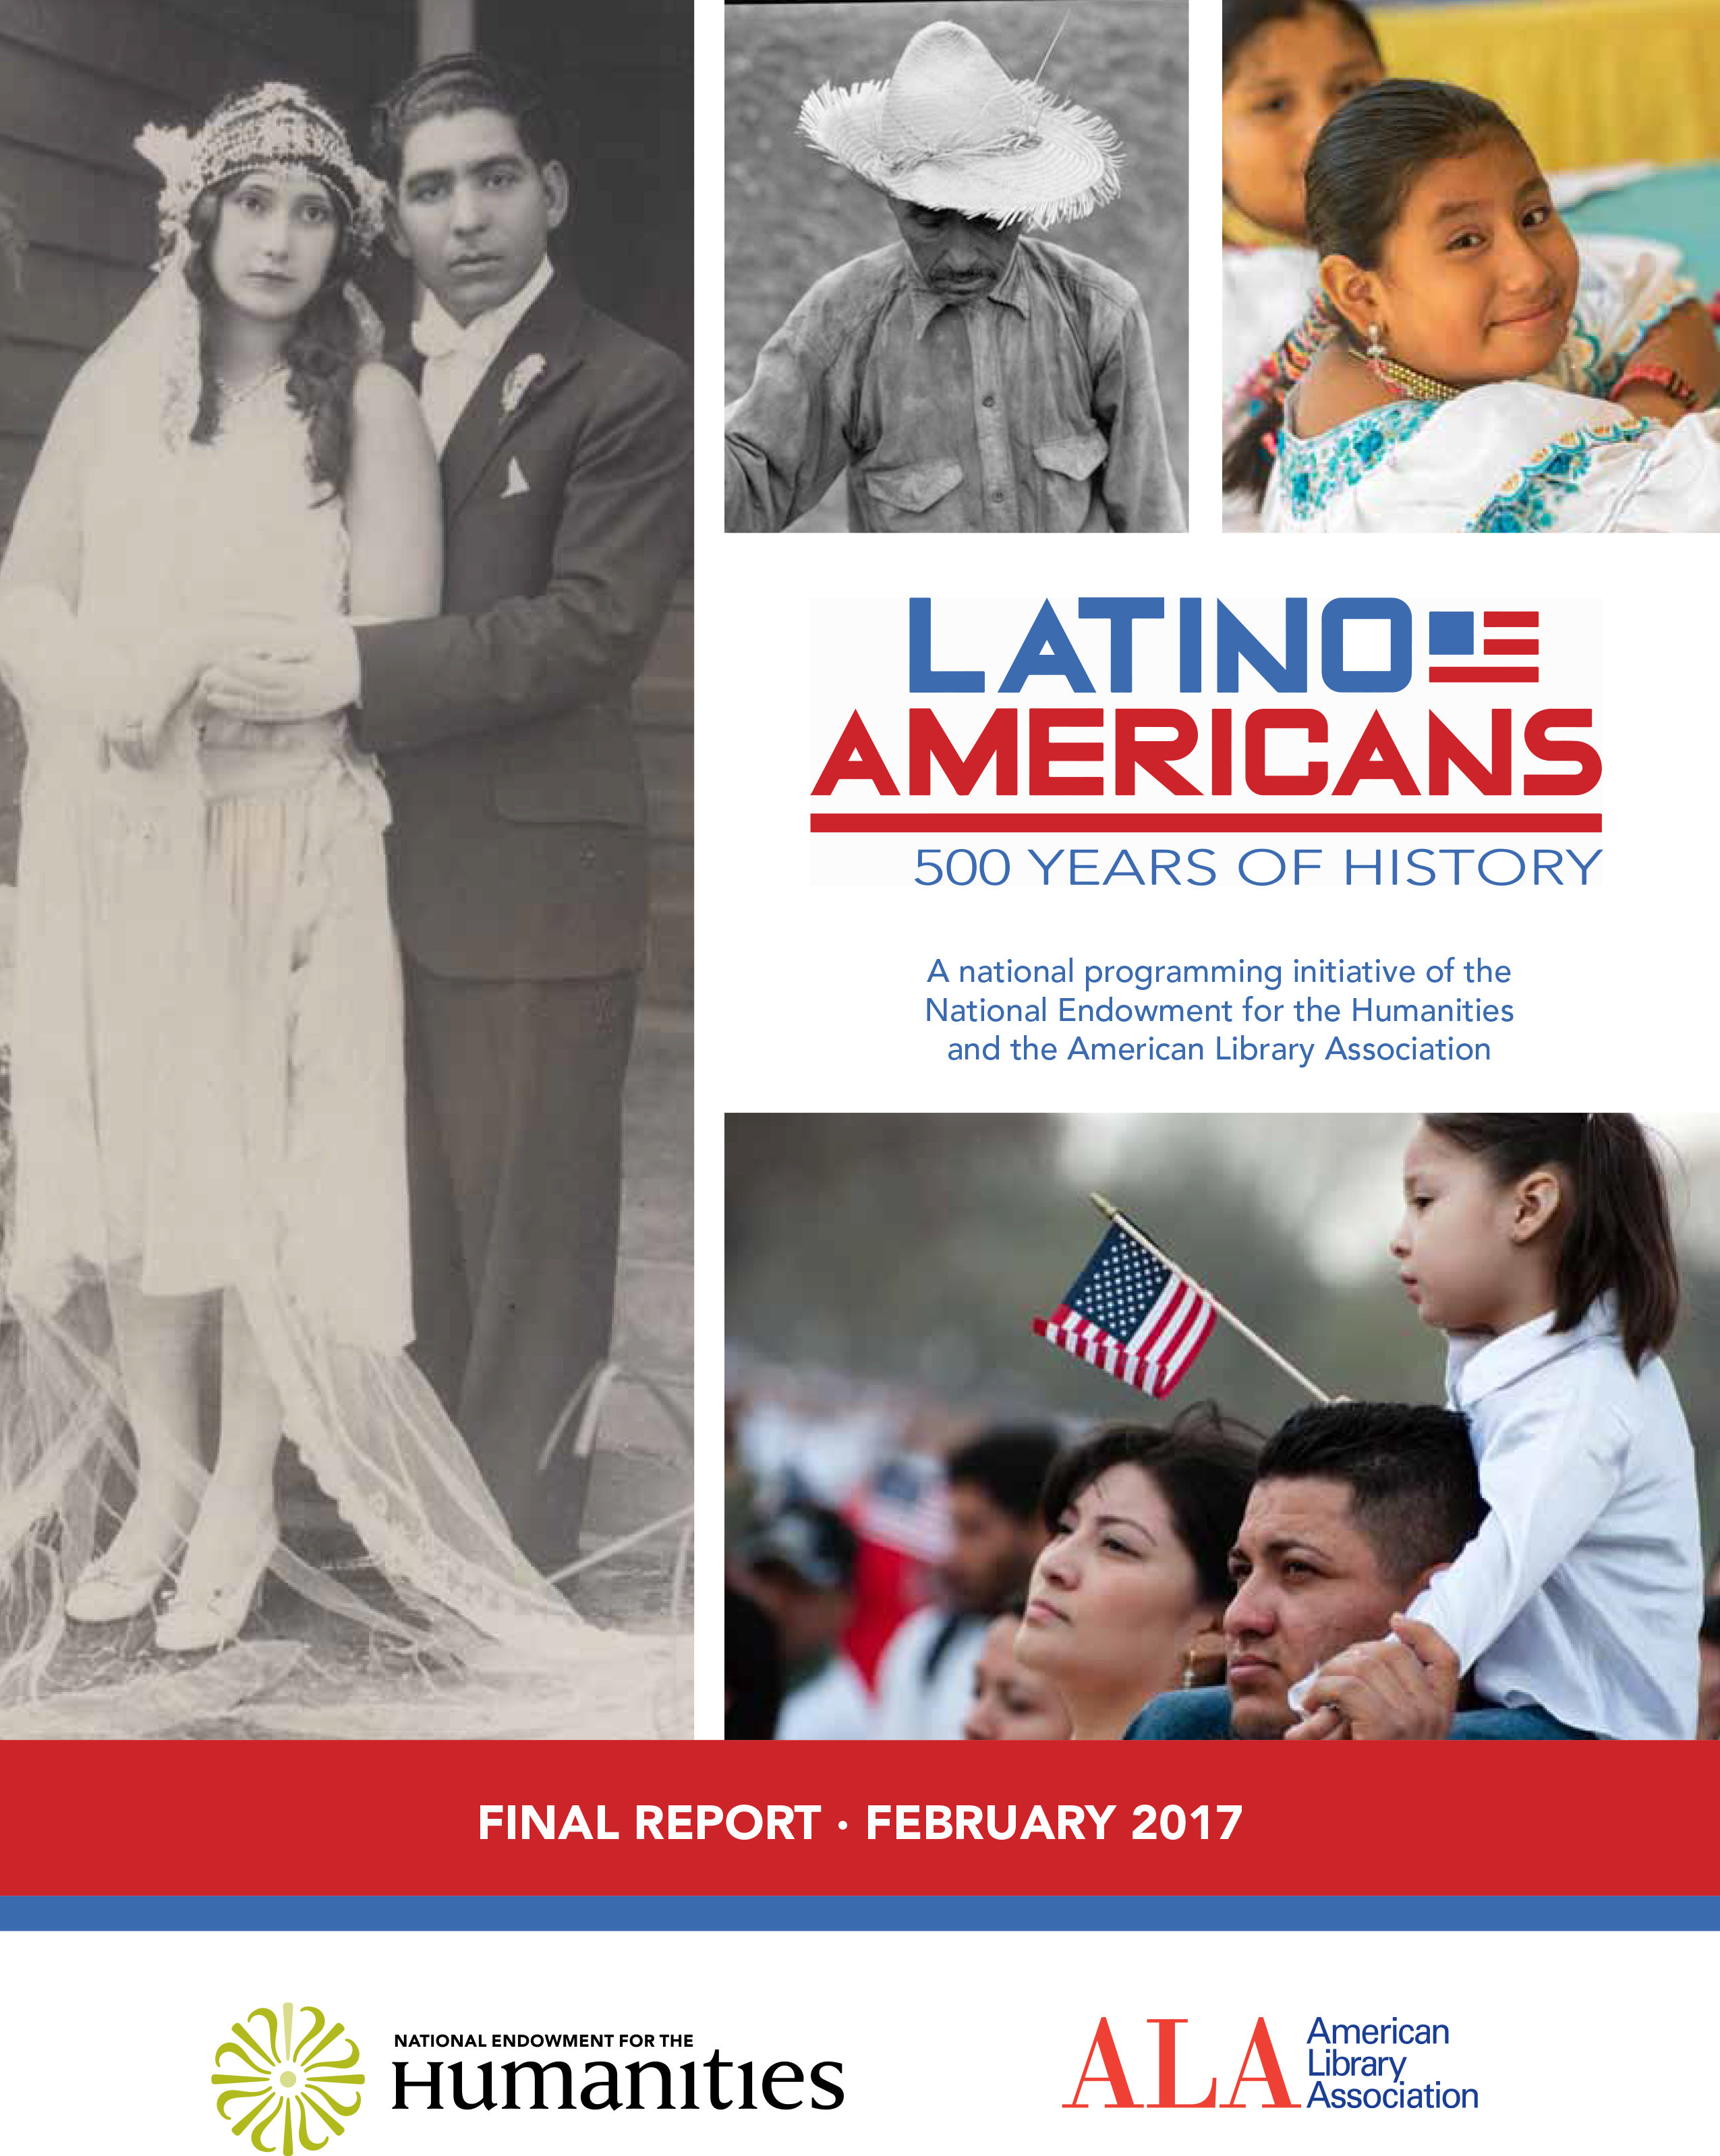 Cover for the Latino Americans report.